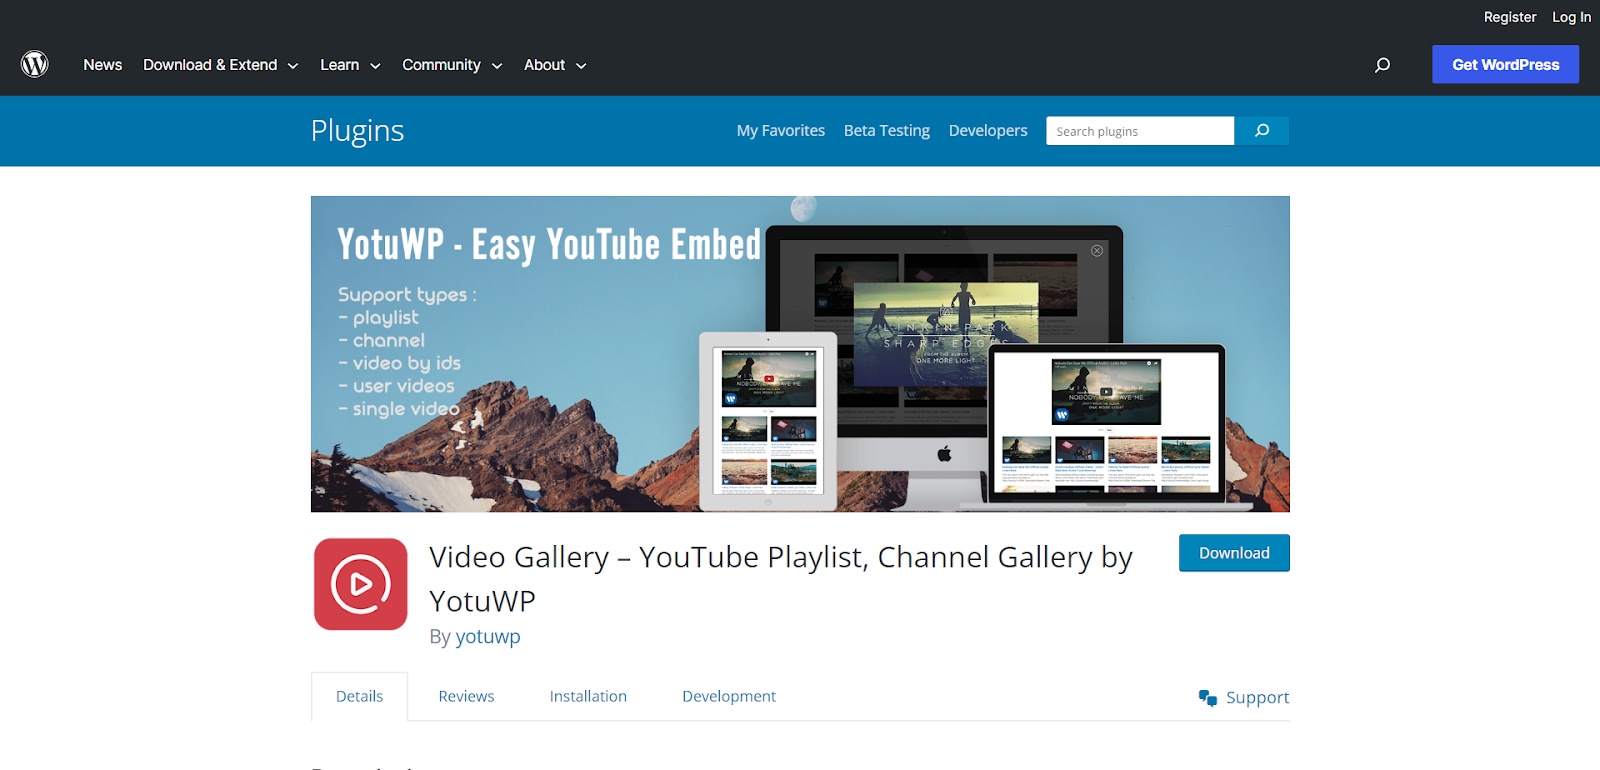 Video Gallery - YouTube Playlist, Channel Gallery plugin by YotuWP